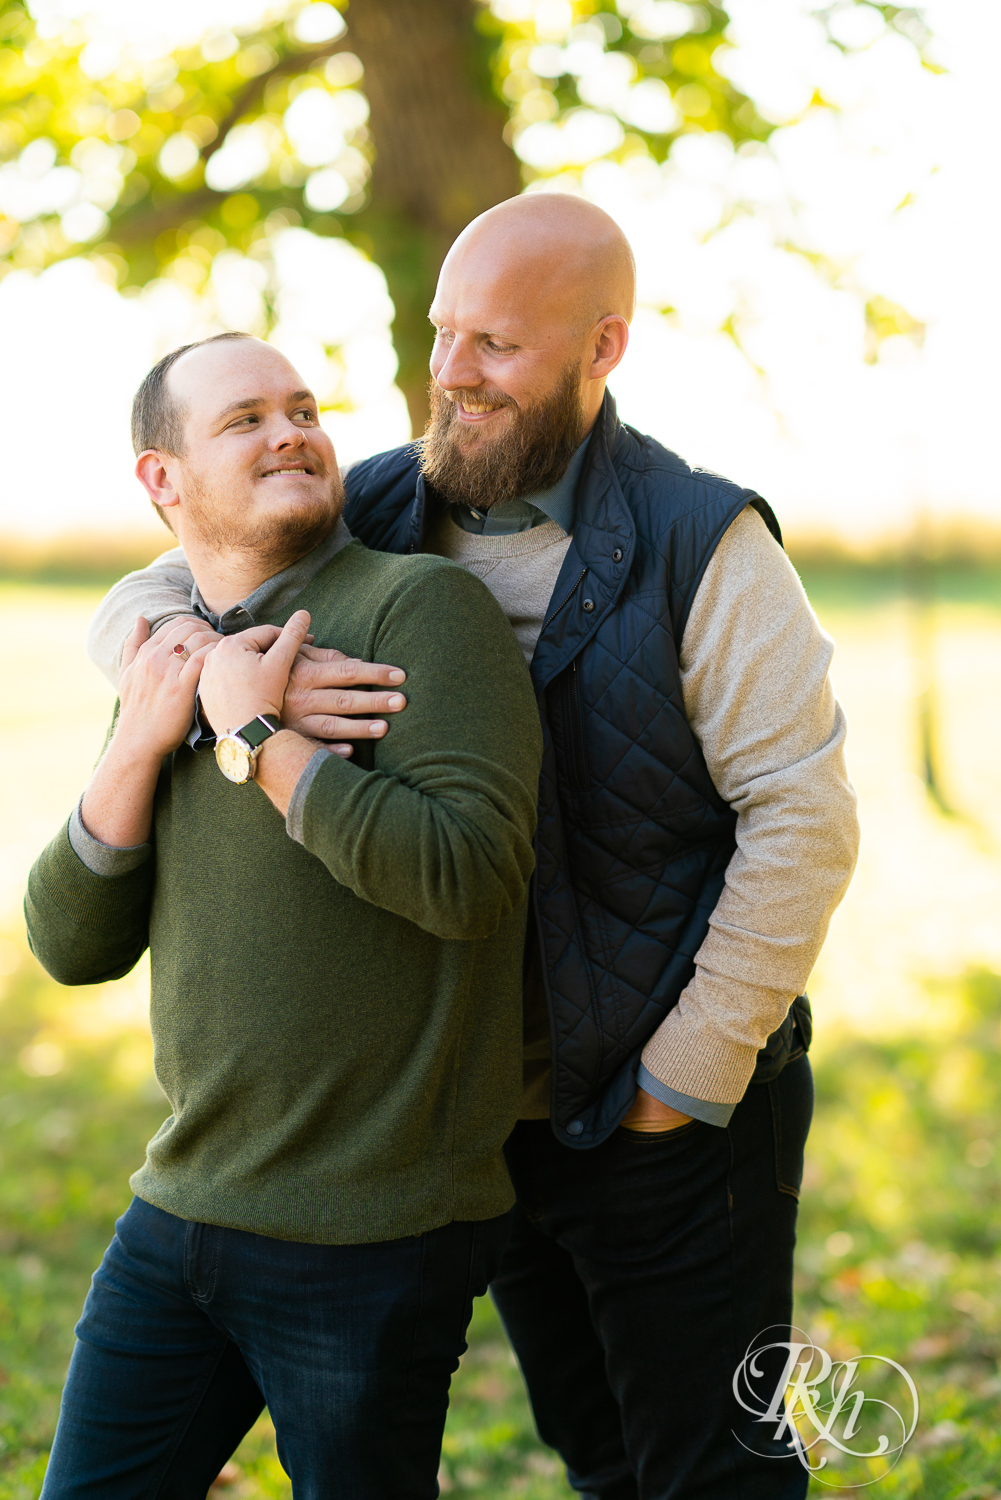 Two gay men holding hands and smiling in Belle Plaine, Minnesota.